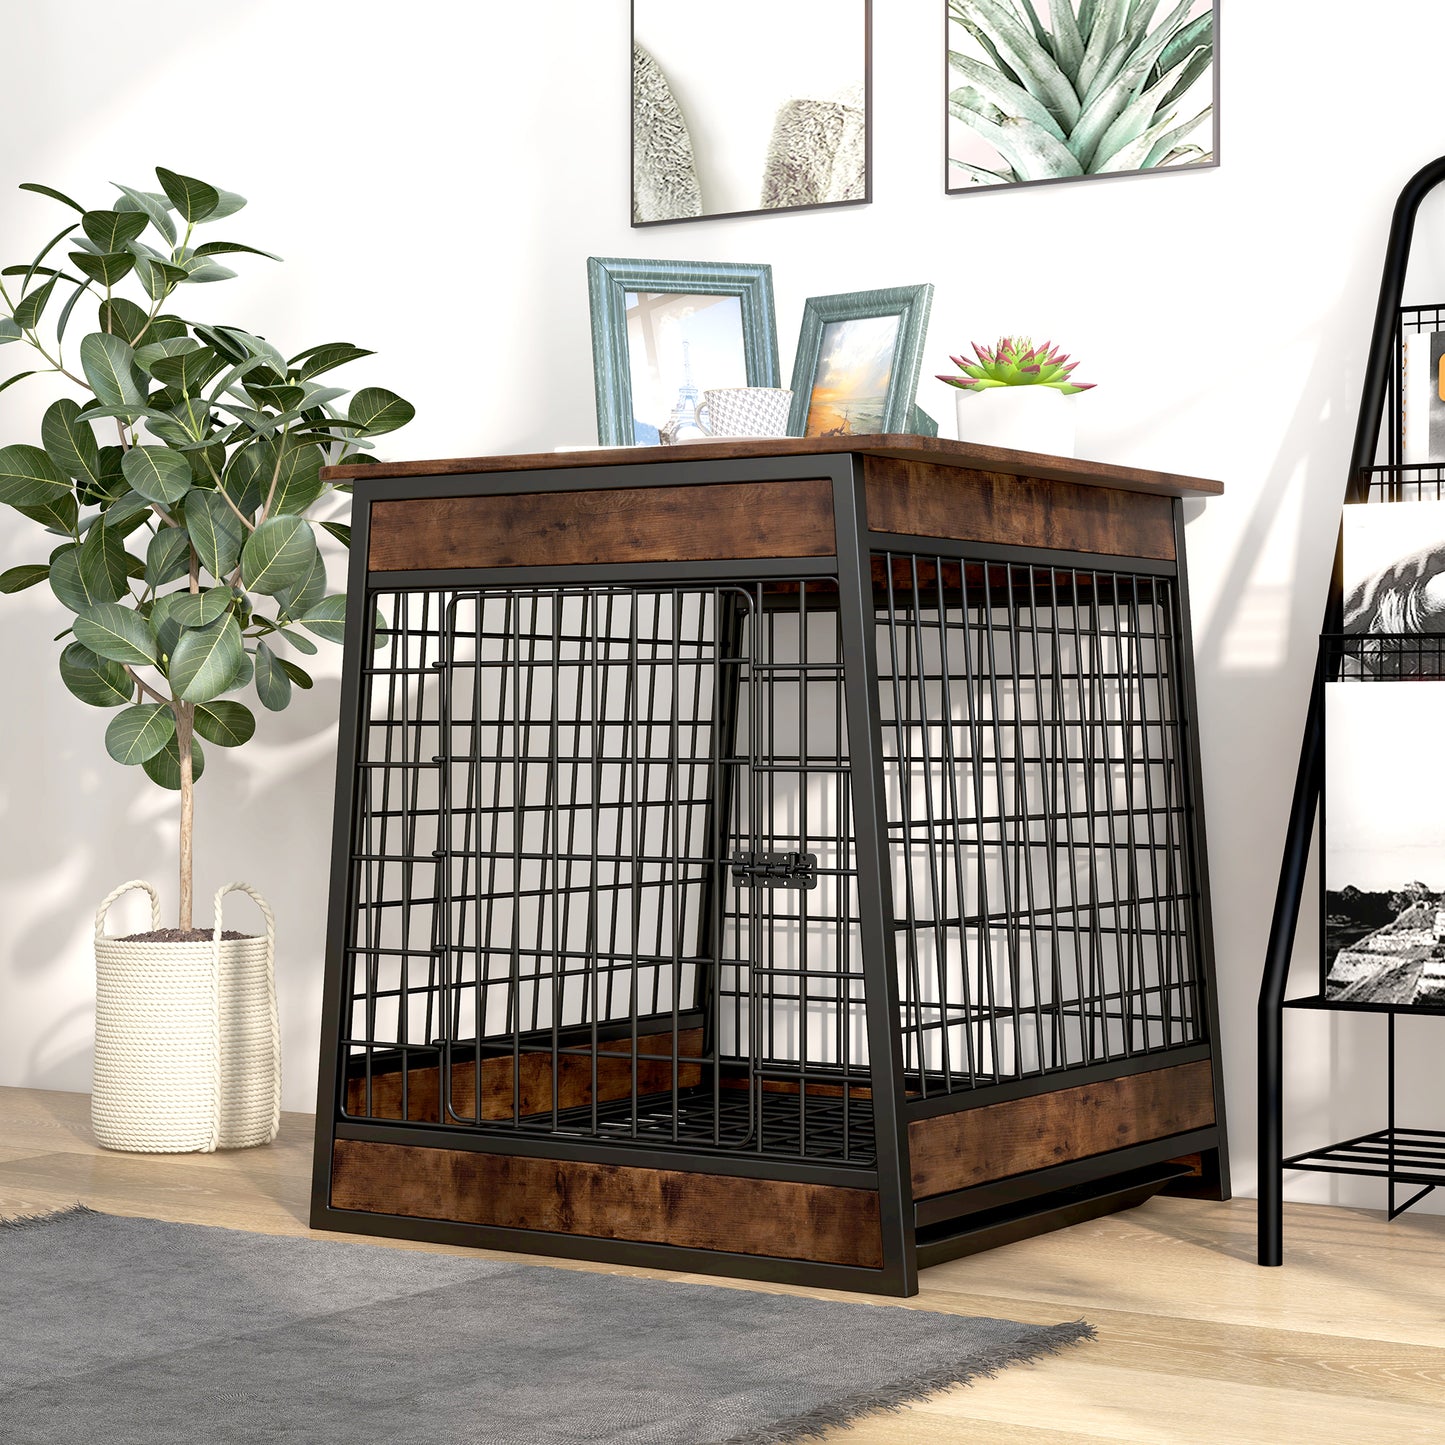 Furniture style dog cage, wooden dog cage,  side cabinet dog crate